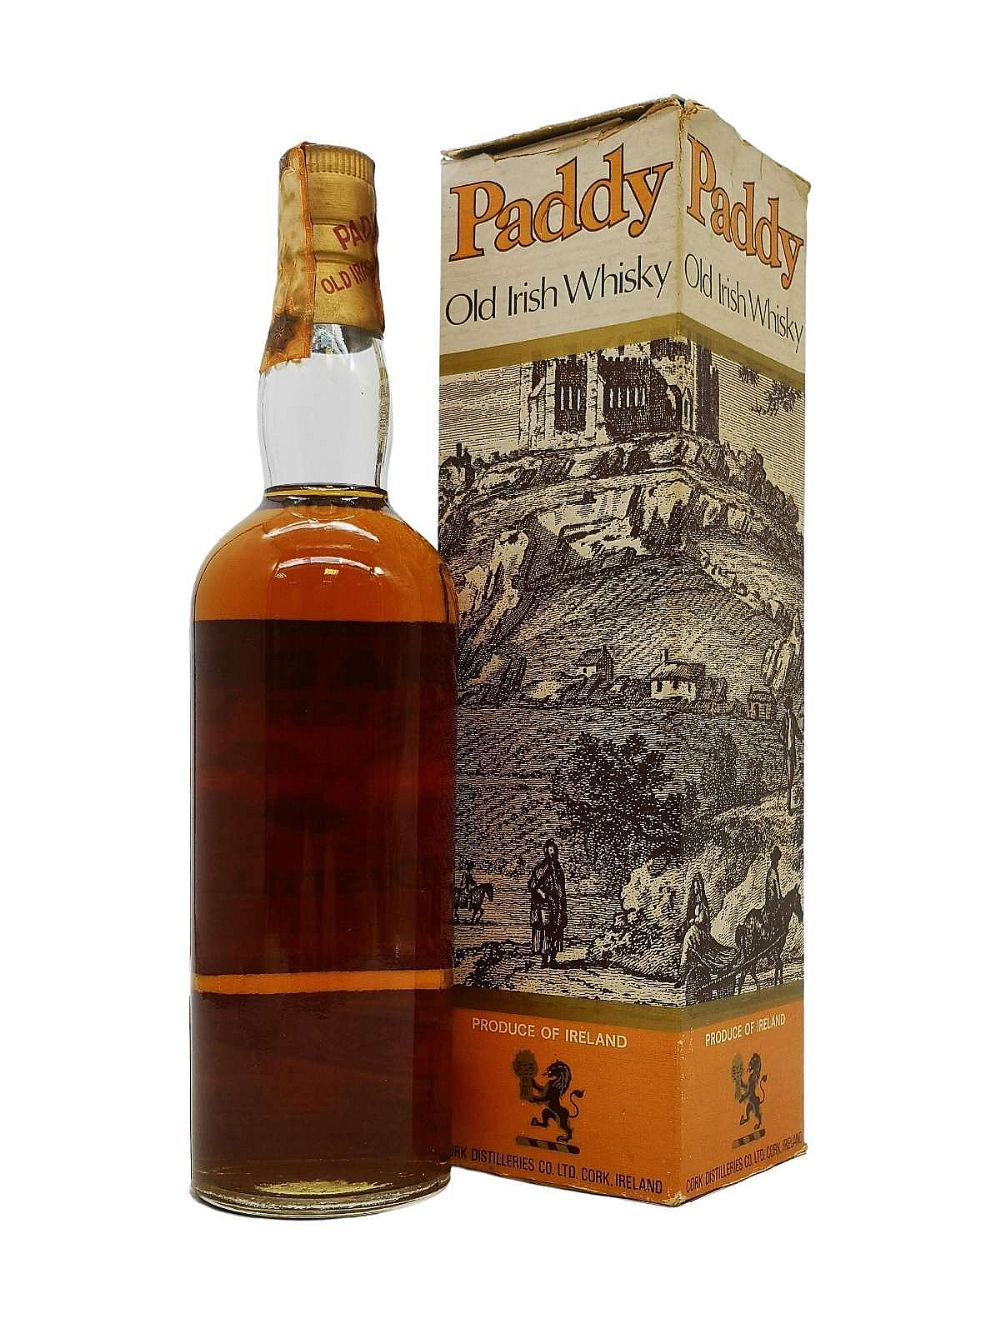 Paddy 10 year old, Old Irish Whiskey, Cork Distilleries Company, pre-1966 bottling